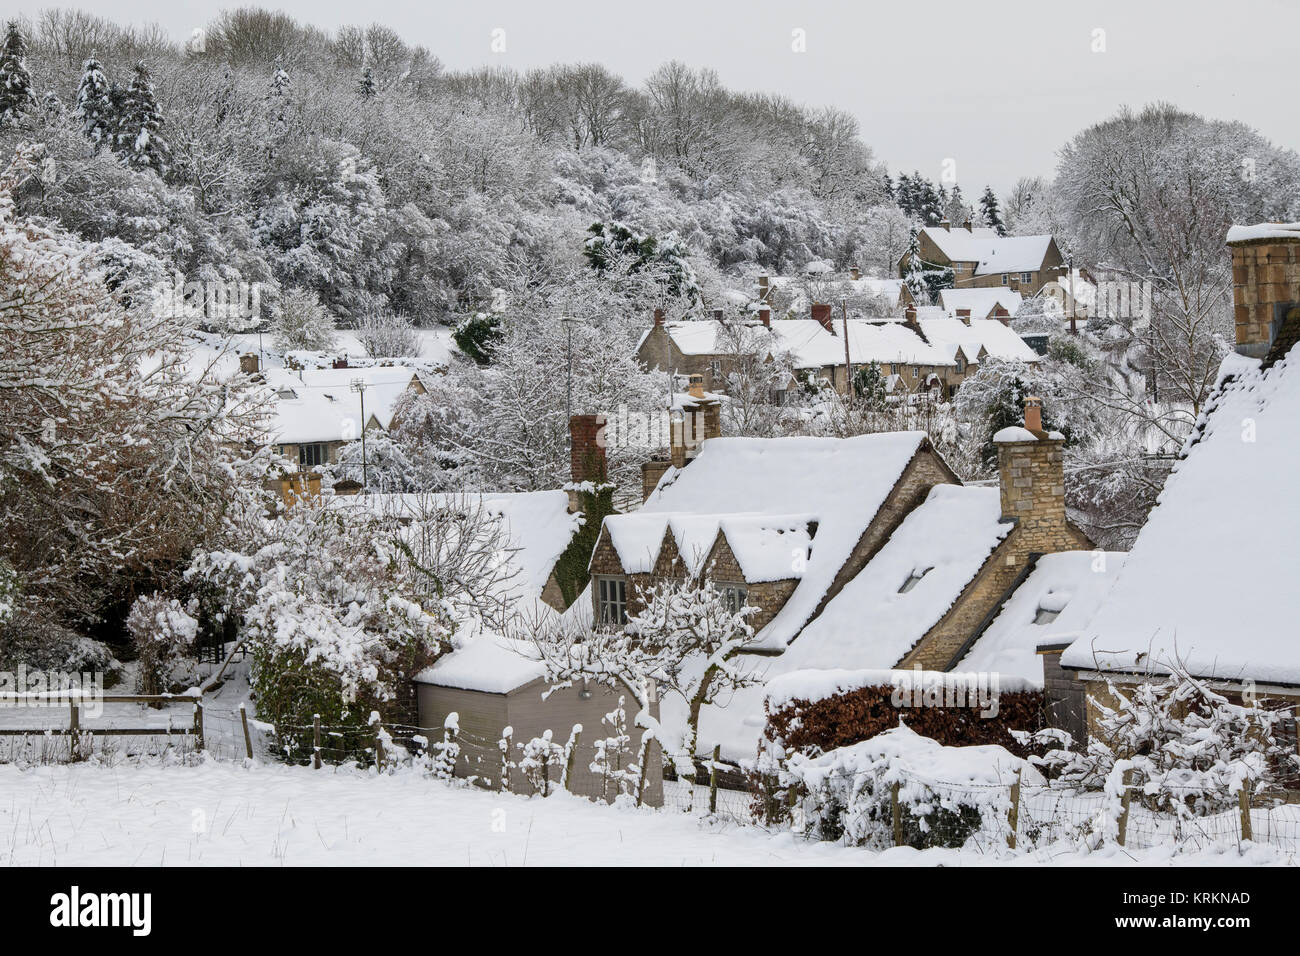 Chedworth Dorf im Dezember Schnee. Chedworth, Cotswolds, Gloucestershire, England Stockfoto